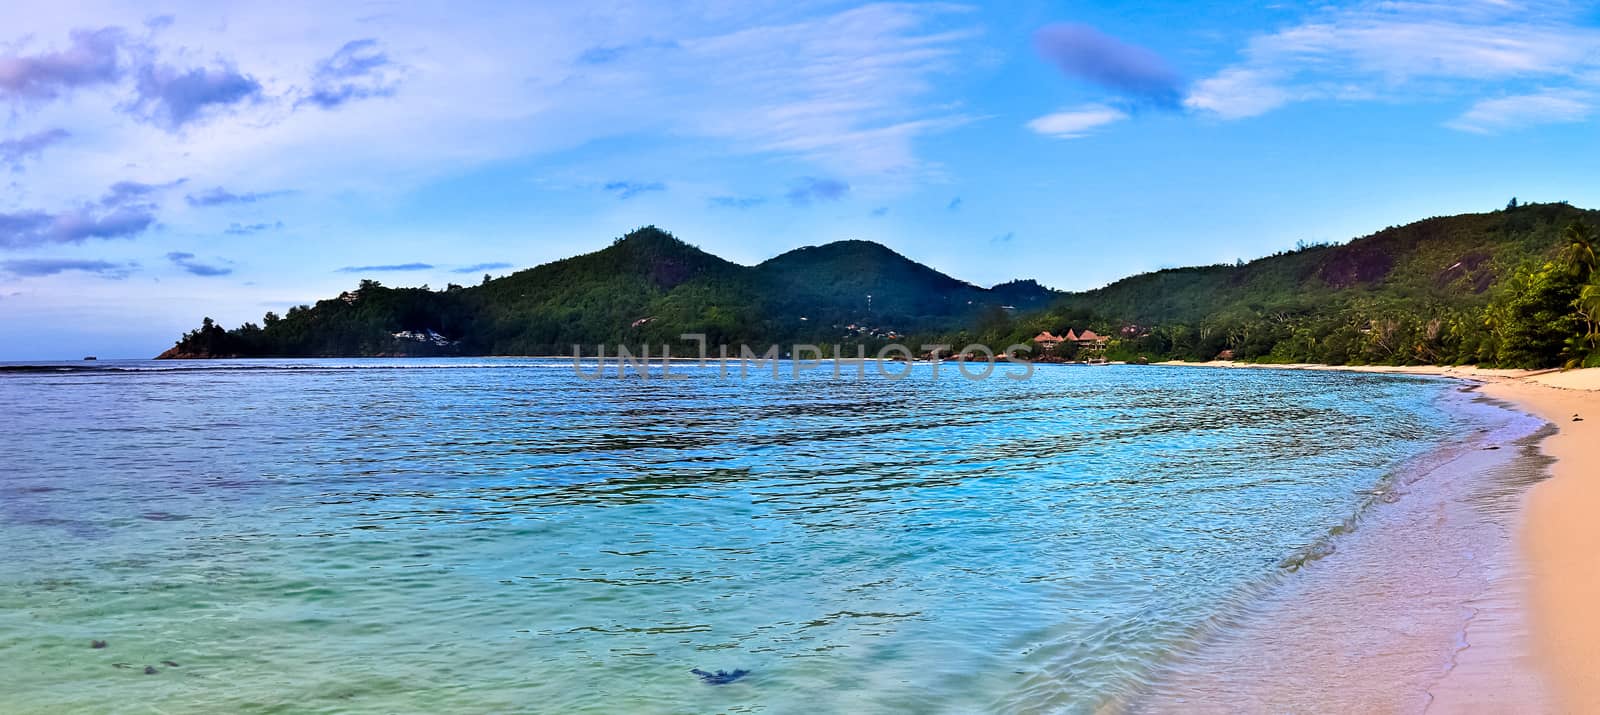 Stunning high resolution beach panorama taken on the paradise is by MP_foto71